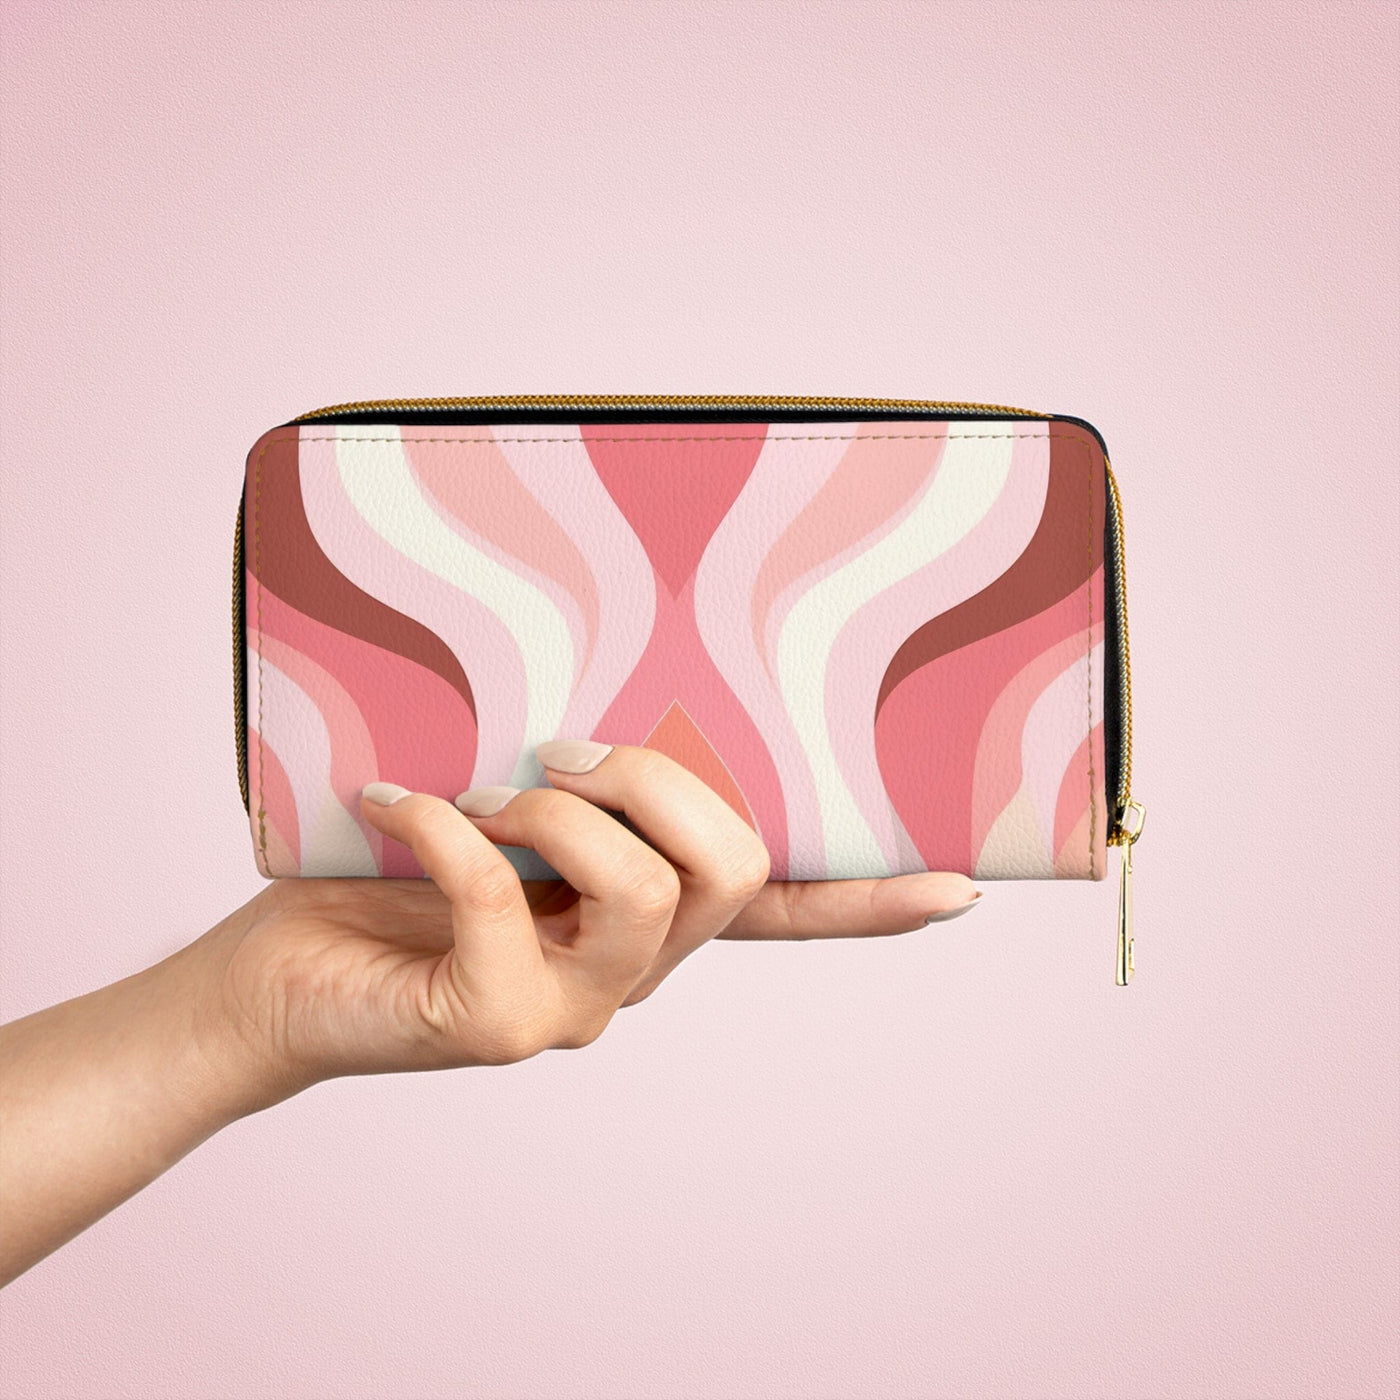 Boho Pink And White Contemporary Art Lined Pattern Womens Zipper Wallet Clutch